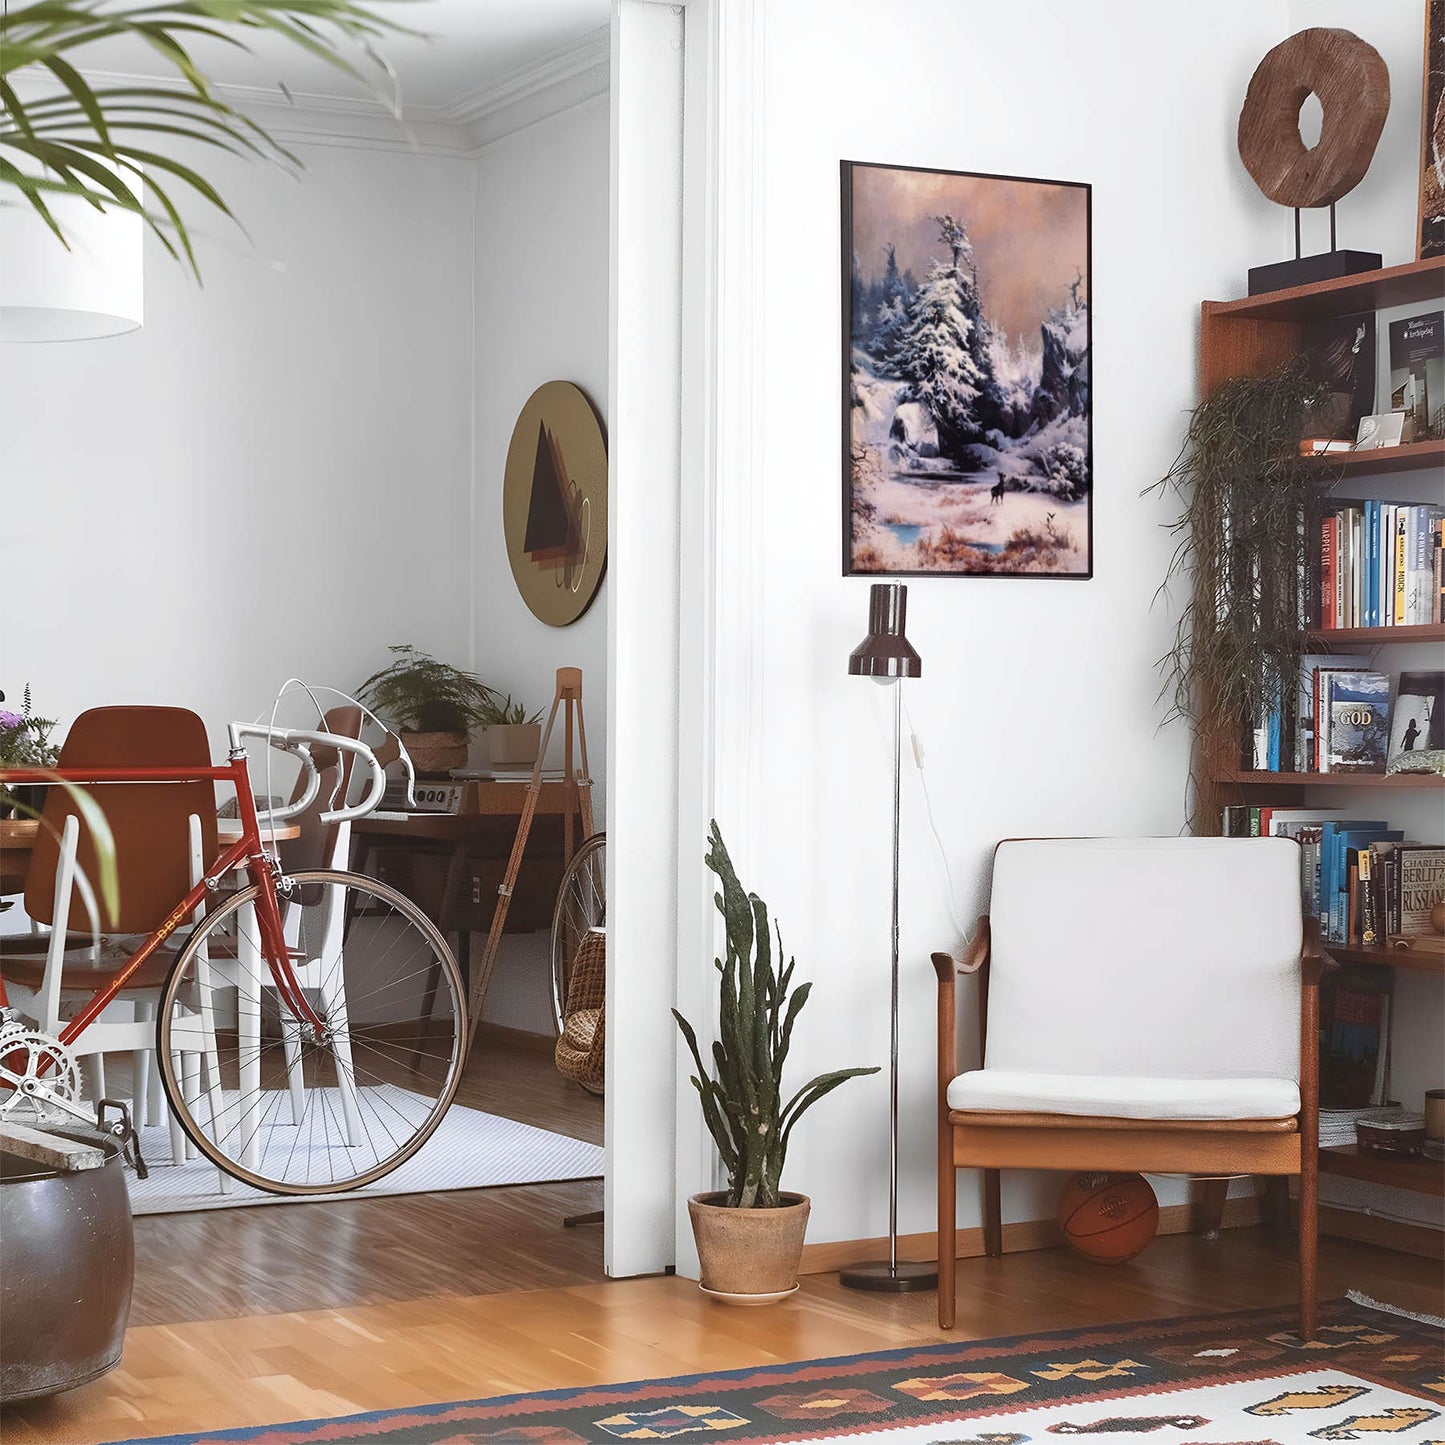 Eclectic living room with a road bike, bookshelf and house plants that features framed artwork of a Forest Covered in Snow above a chair and lamp